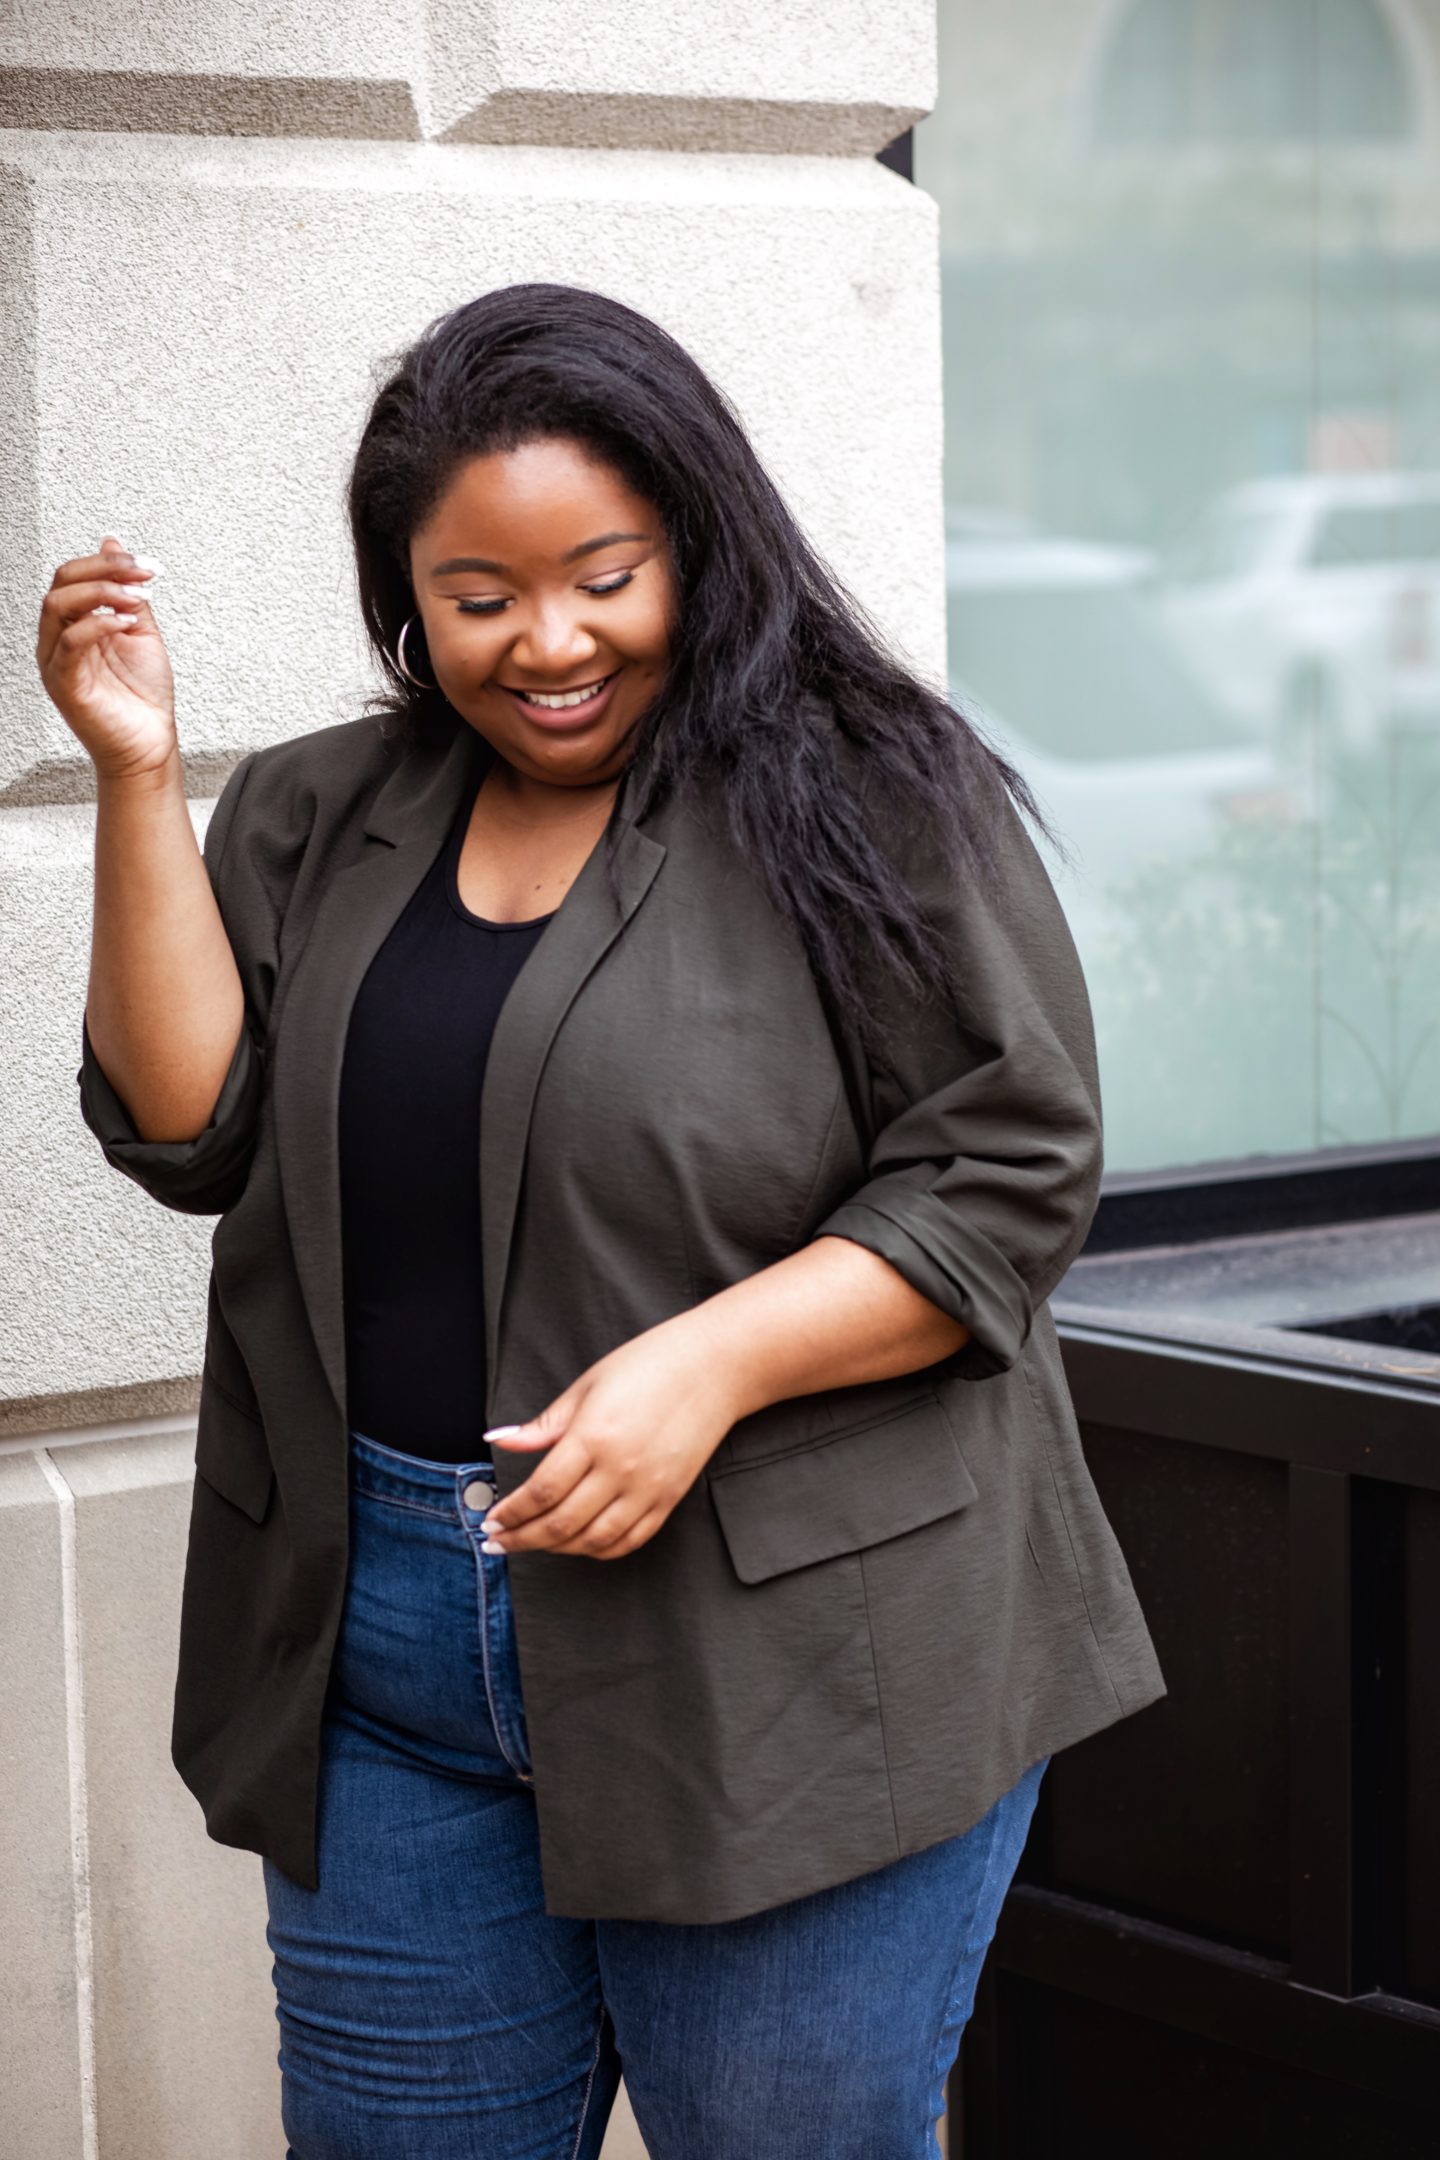 Plus Size Work Outfits and Office Wear